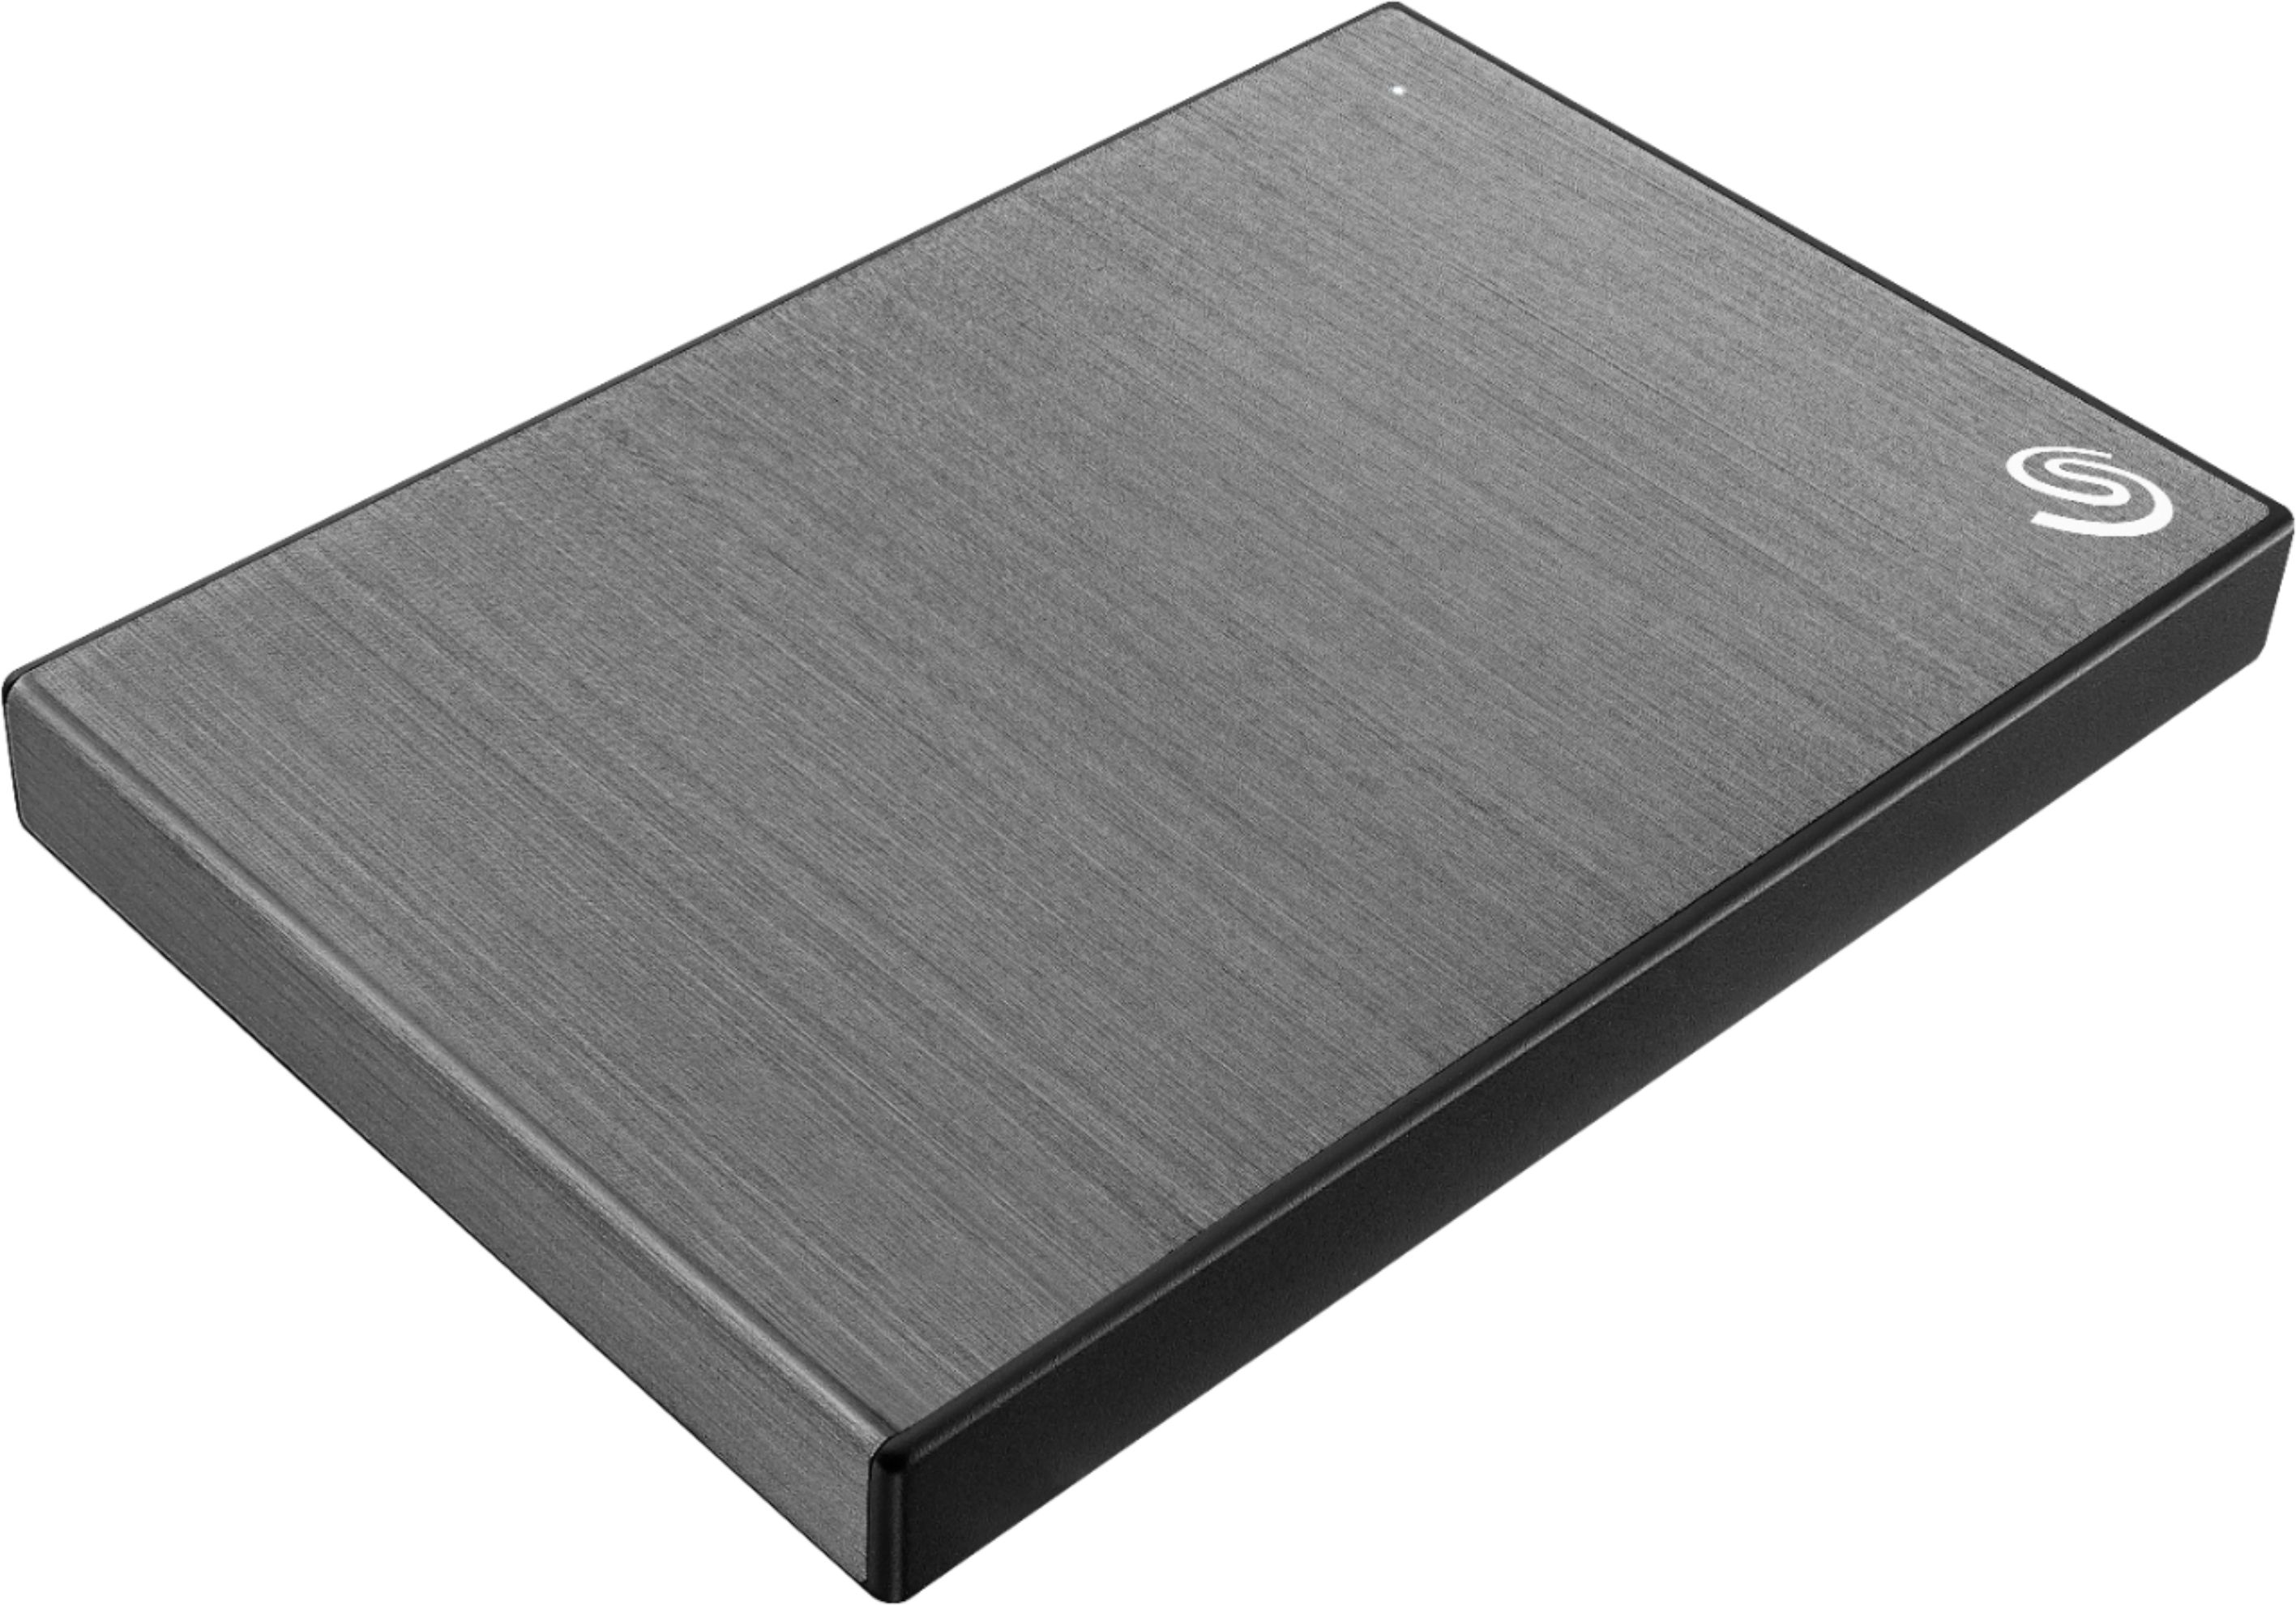 Angle View: Seagate - One Touch 2TB External USB 3.0 Portable Hard Drive with Rescue Data Recovery Services - Space Gray